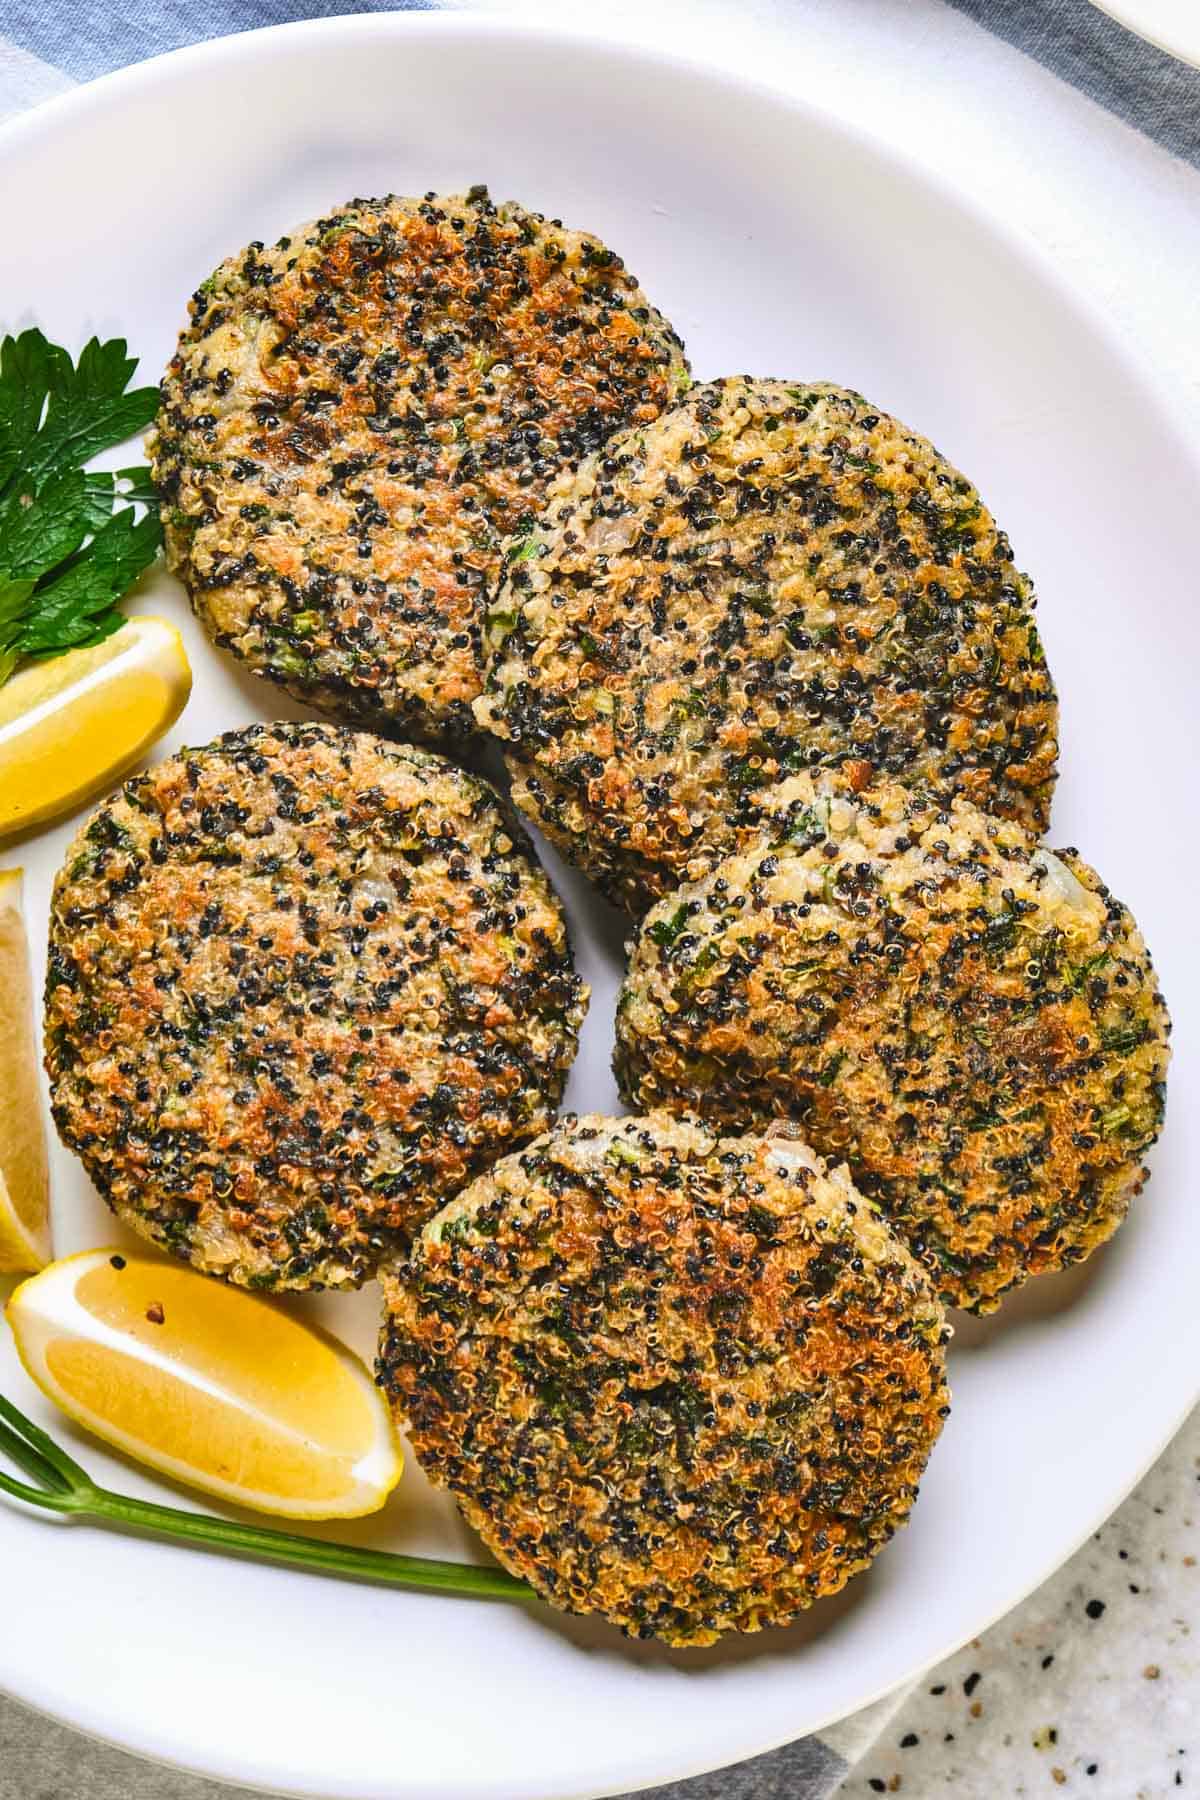 Kale and quinoa cakes on a white plate with lemon wedges.